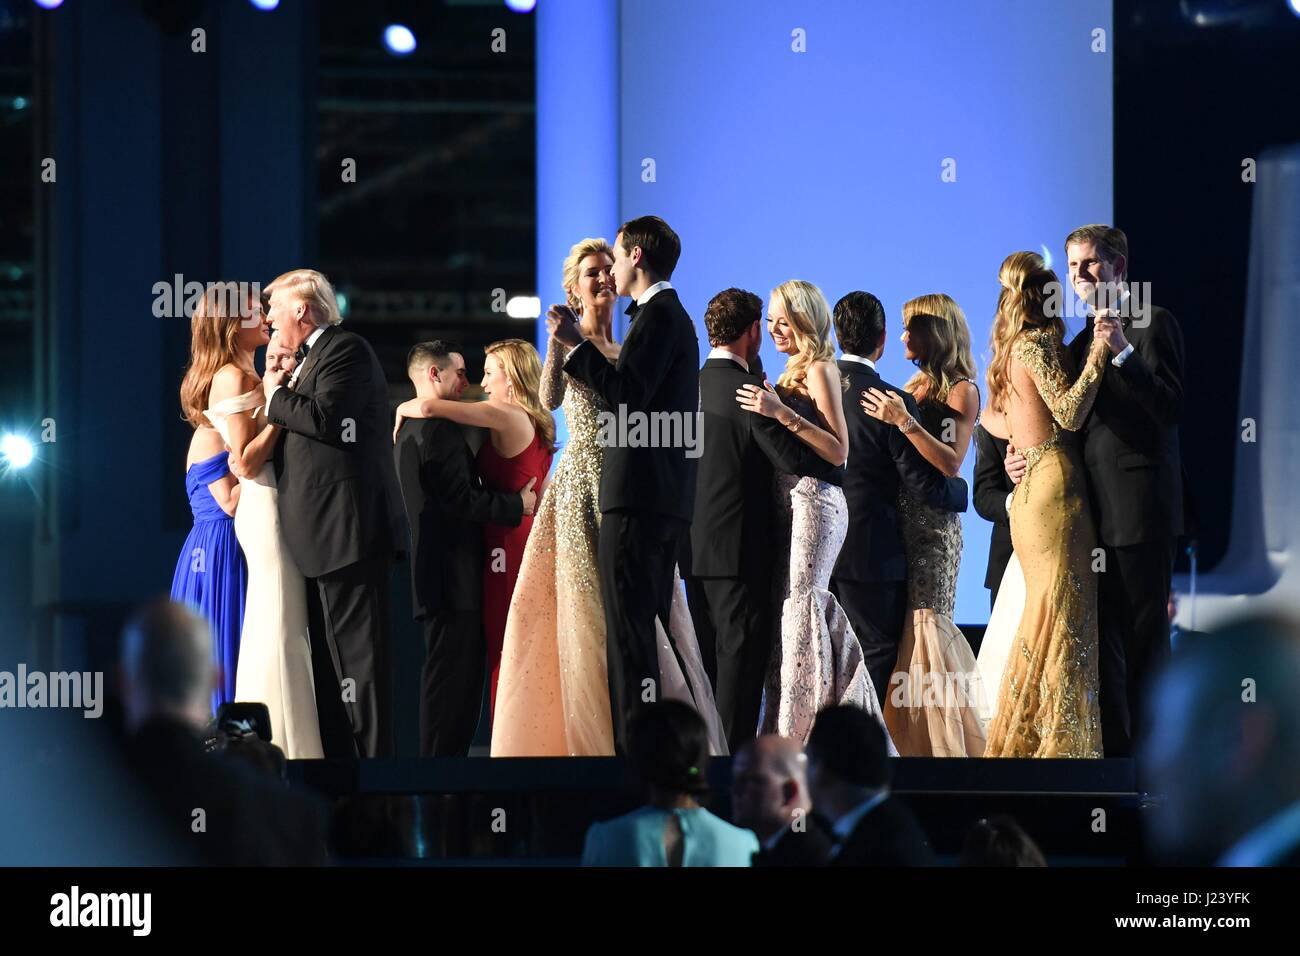 U.S. President Donald Trump, First Lady Melania Trump, and family dance on stage during the 58th Presidential Inauguration Freedom Ball at the Walter E. Washington Convention Center January 20, 2017 in Washington, DC.    (photo by Tammy Nooner/DoD  via Planetpix) Stock Photo